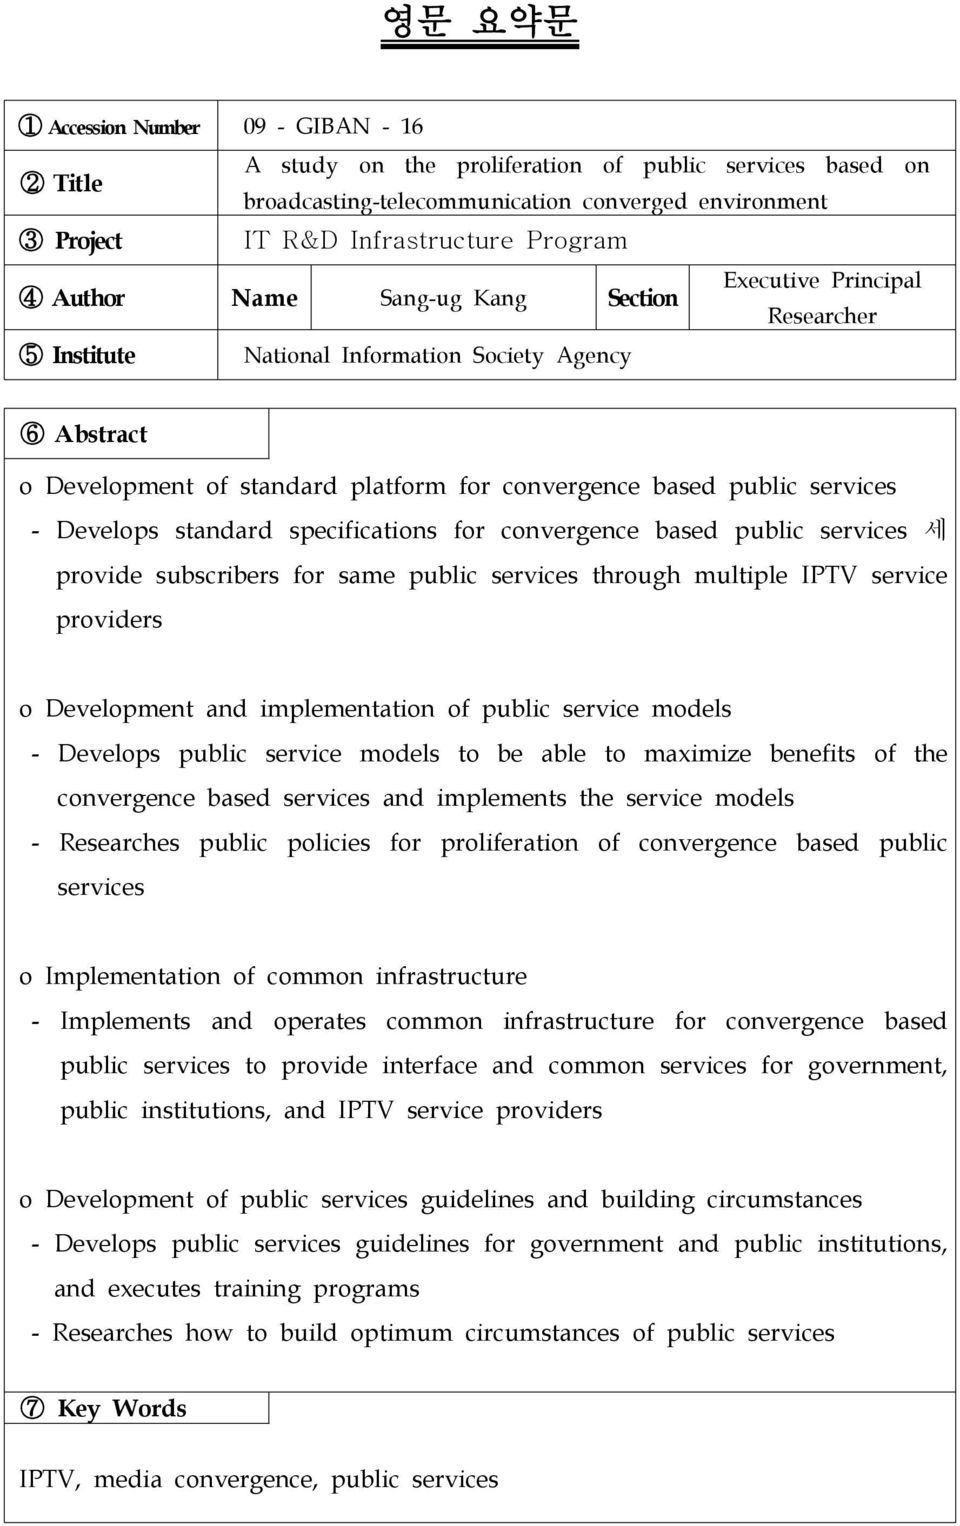 Develops standard specifications for convergence based public services 세 provide subscribers for same public services through multiple IPTV service providers o Development and implementation of